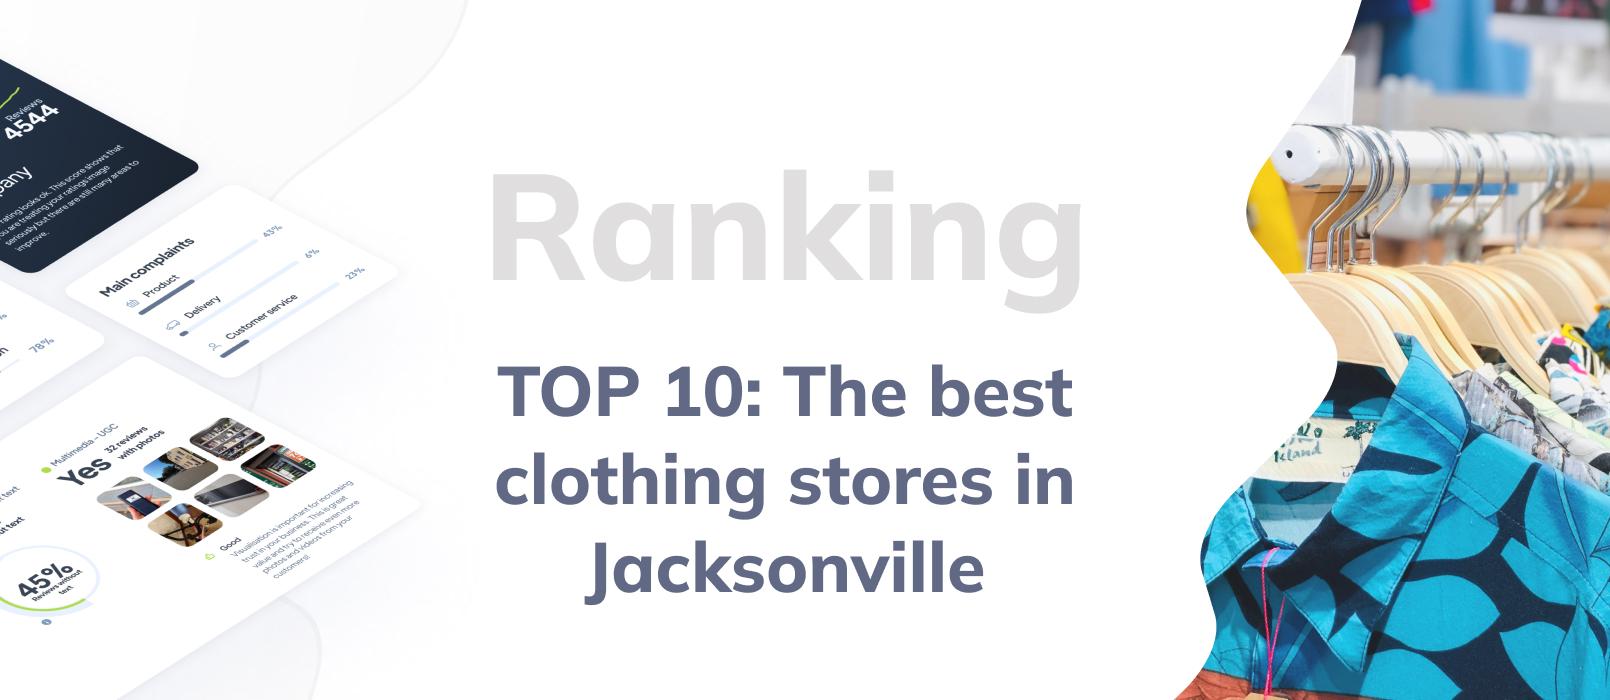 Clothing stores in Jacksonville - TOP 10 ranking